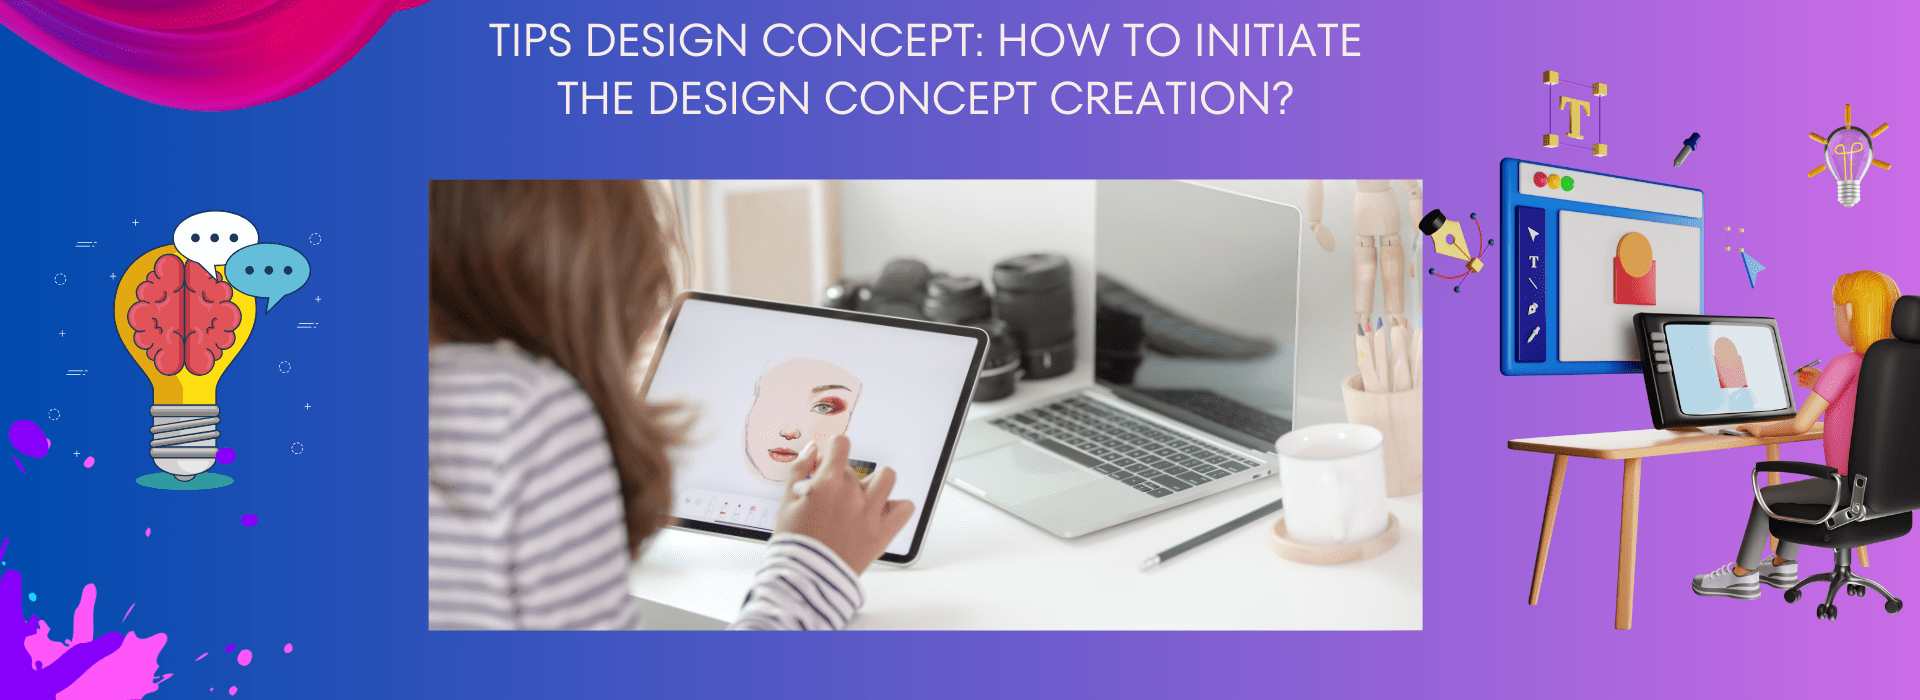 Tips Design Concept How to Initiate the Design Concept Creation